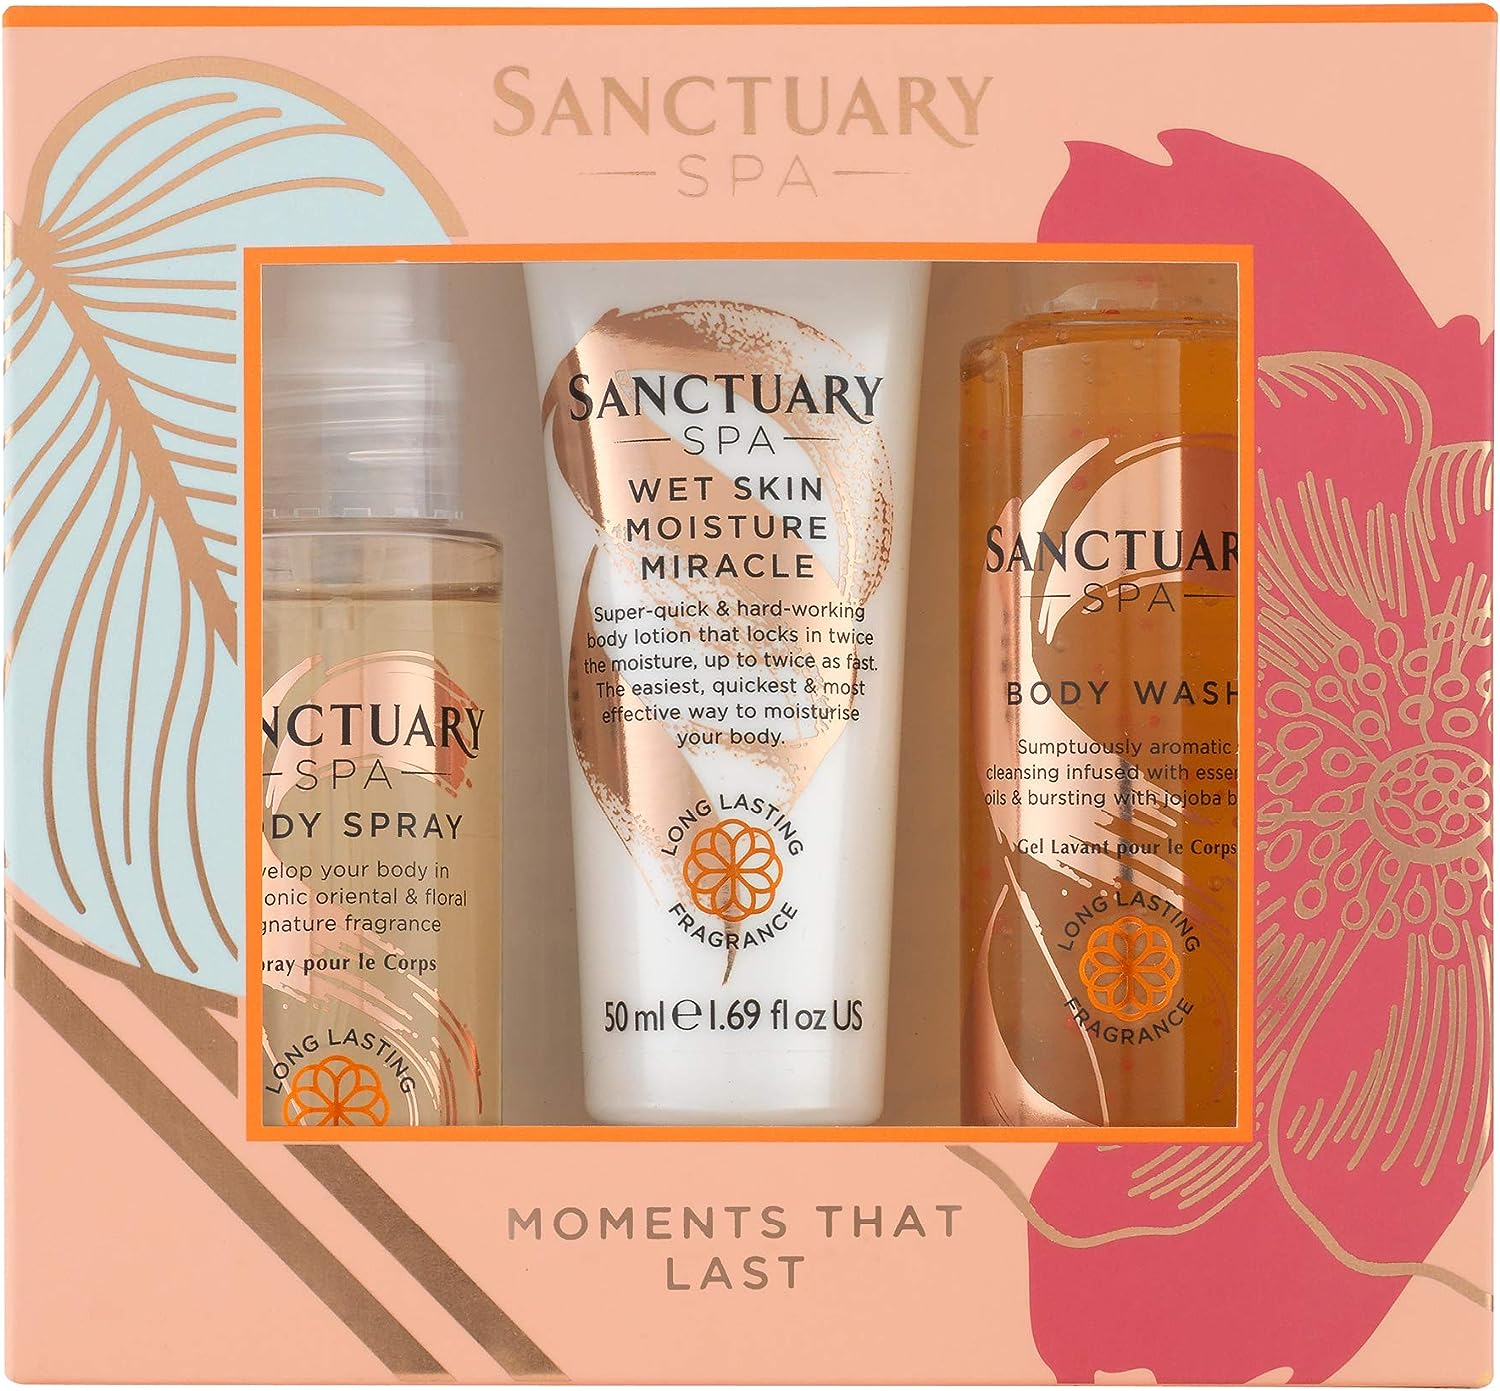 Sanctuary Spa Gift Set, Moments That Last Gift Box with Shower Gel